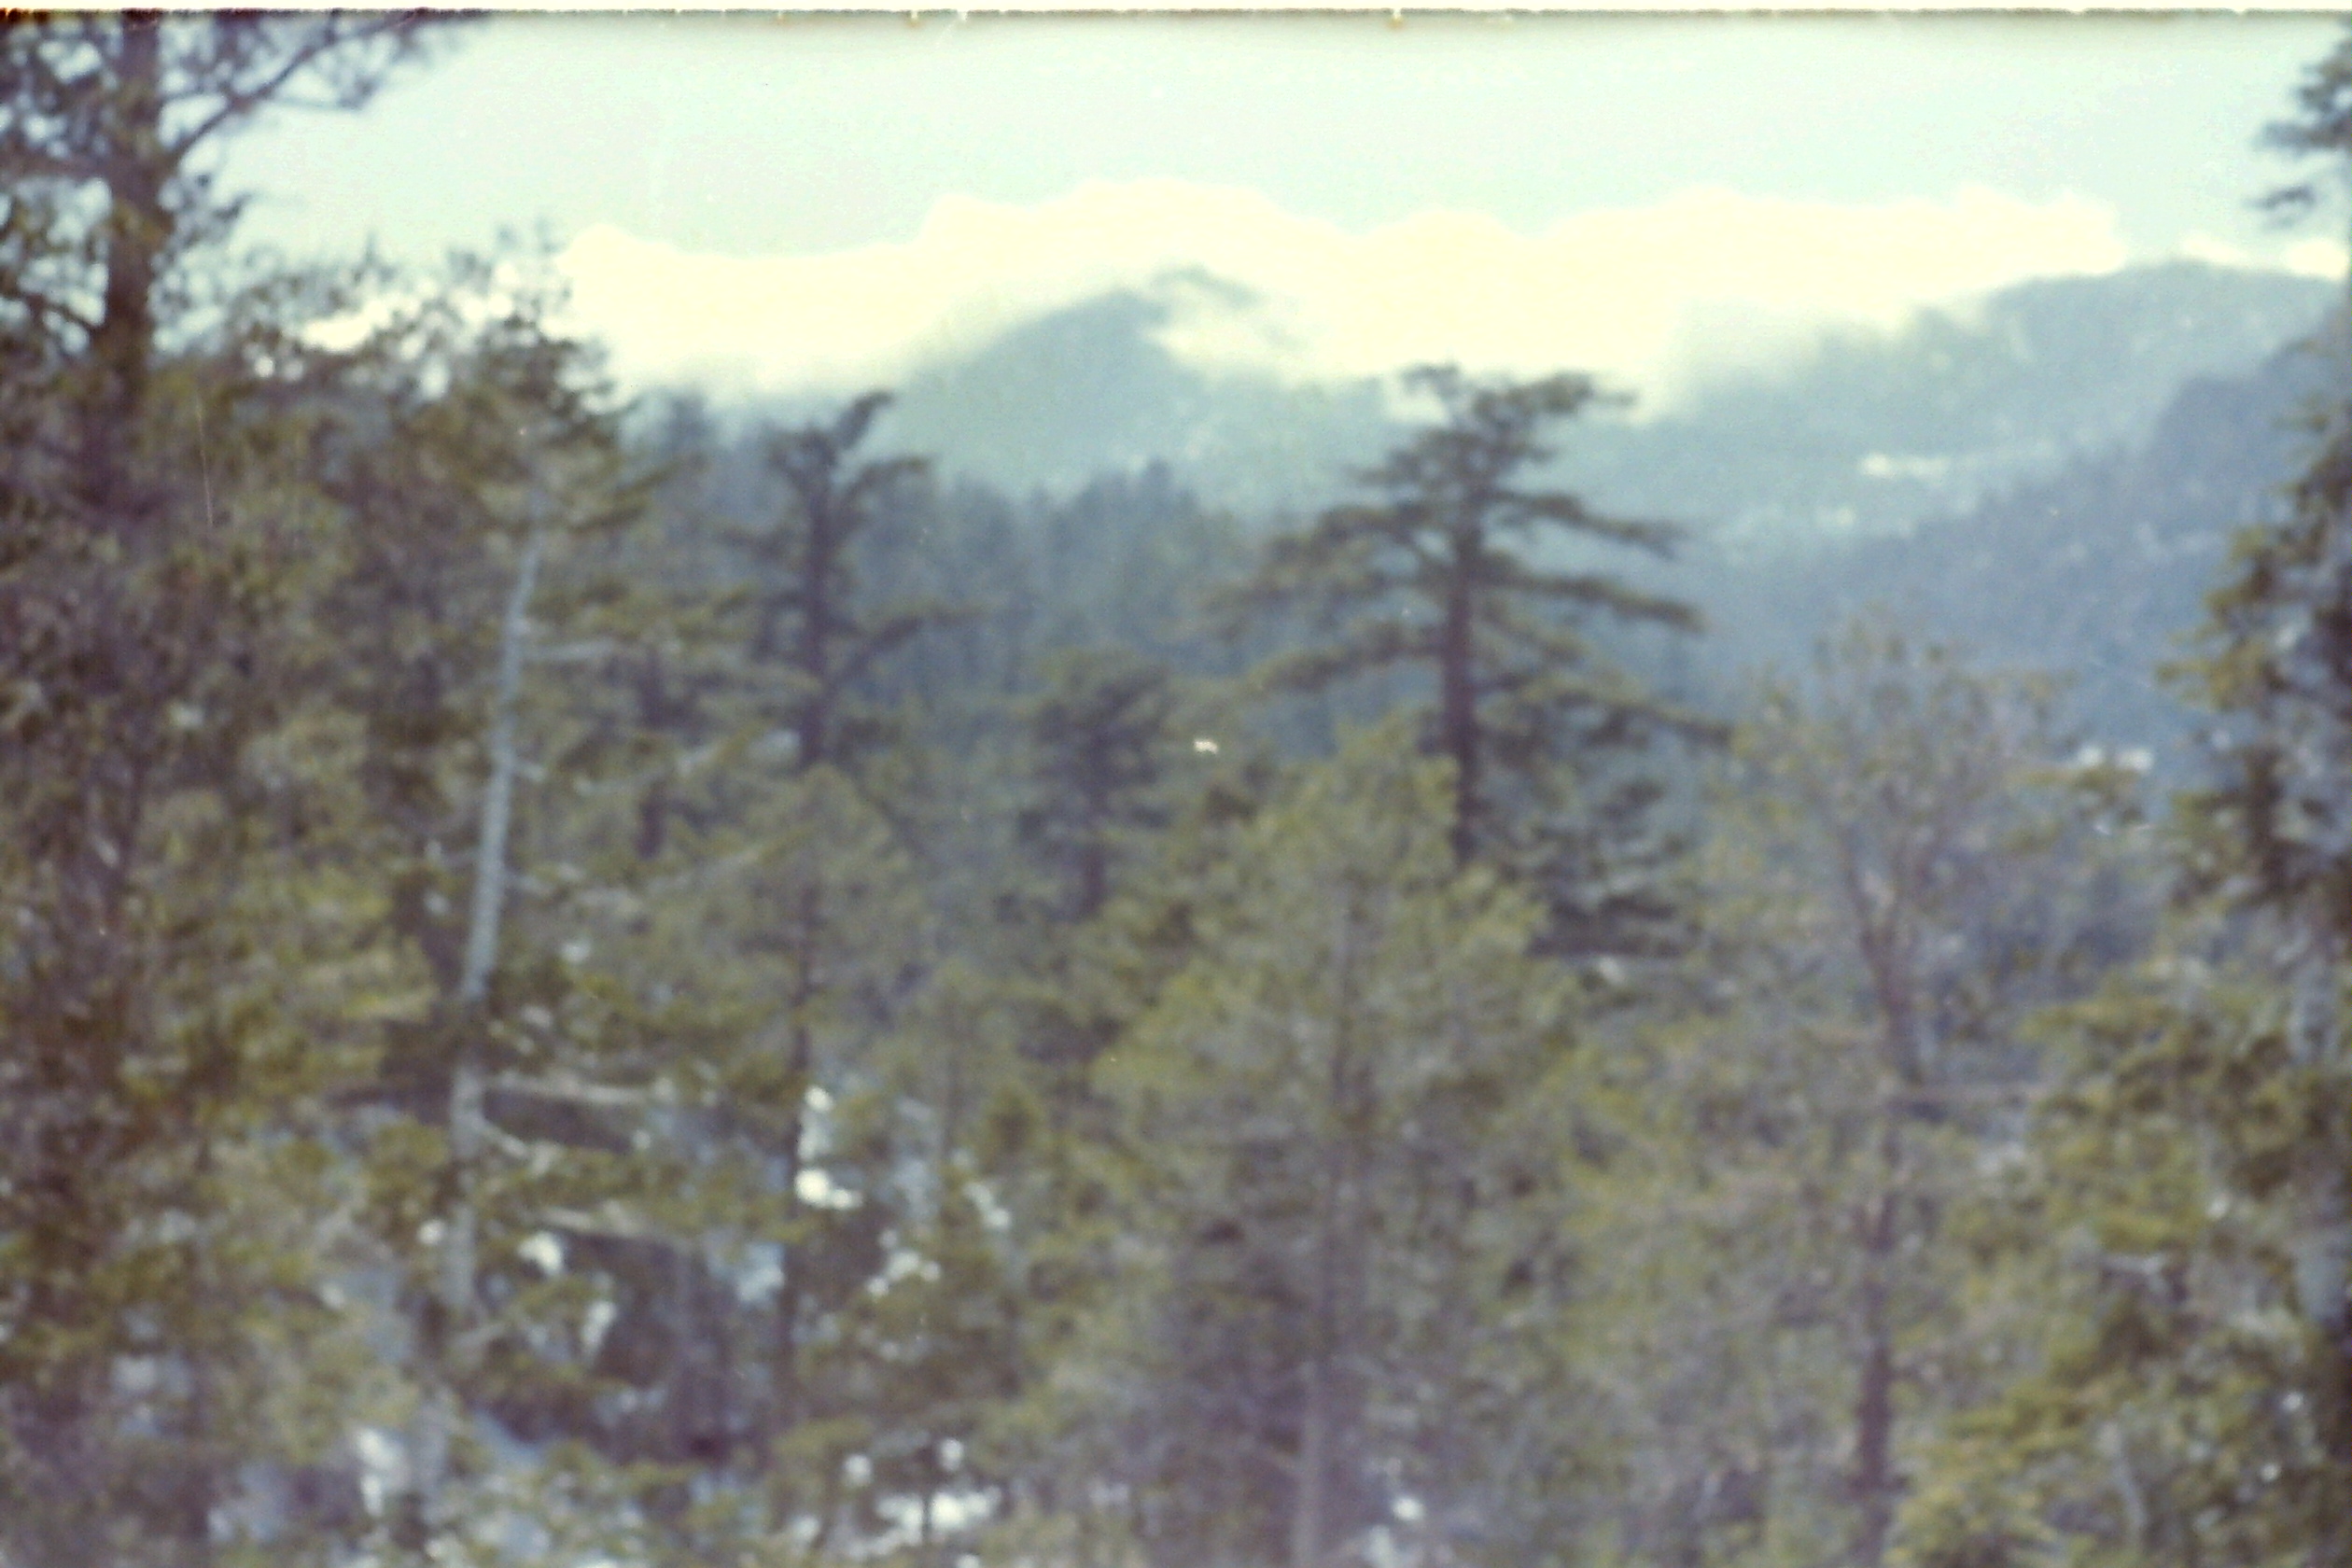 1974-08_P35 MtSanJacinto_prob not part of this batch - dont know date